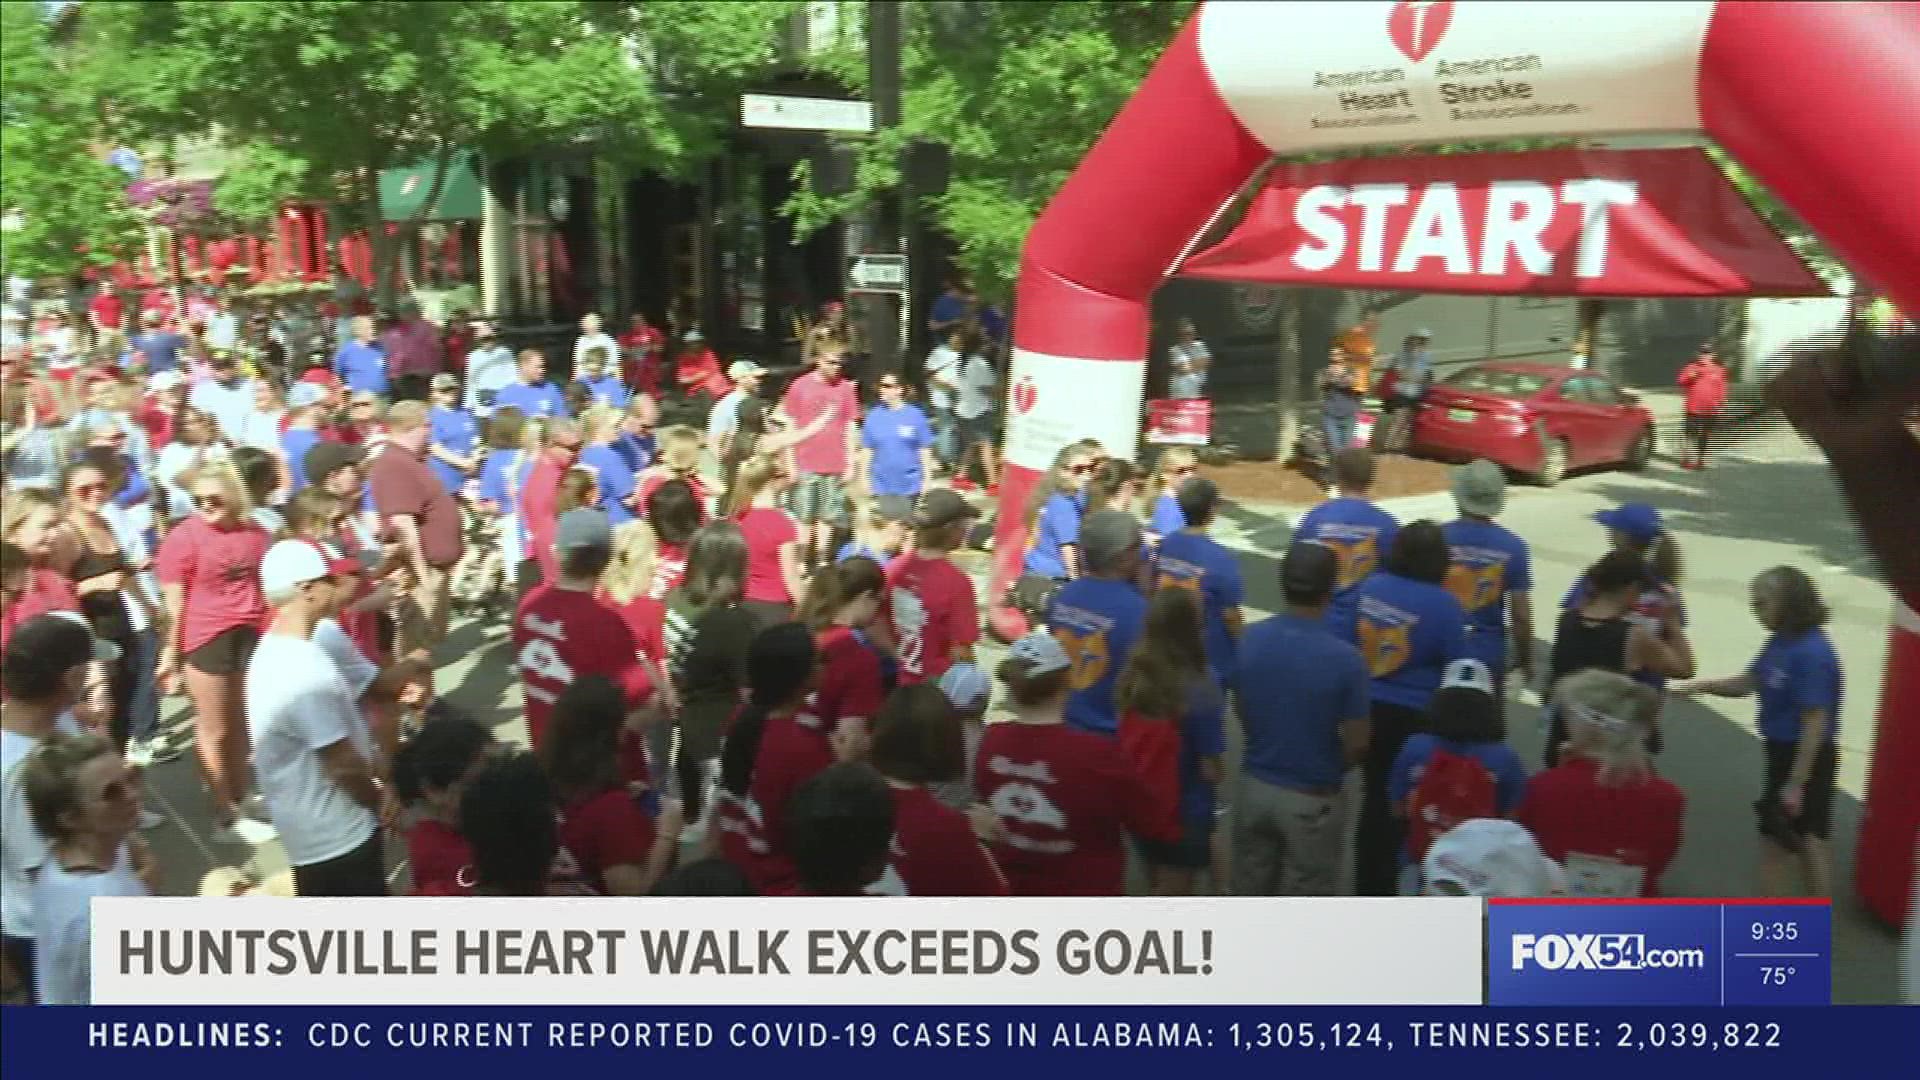 The Huntsville Heart Walk returned as an in-person event for the first time in three years. The event raises money for the American Heart Association.